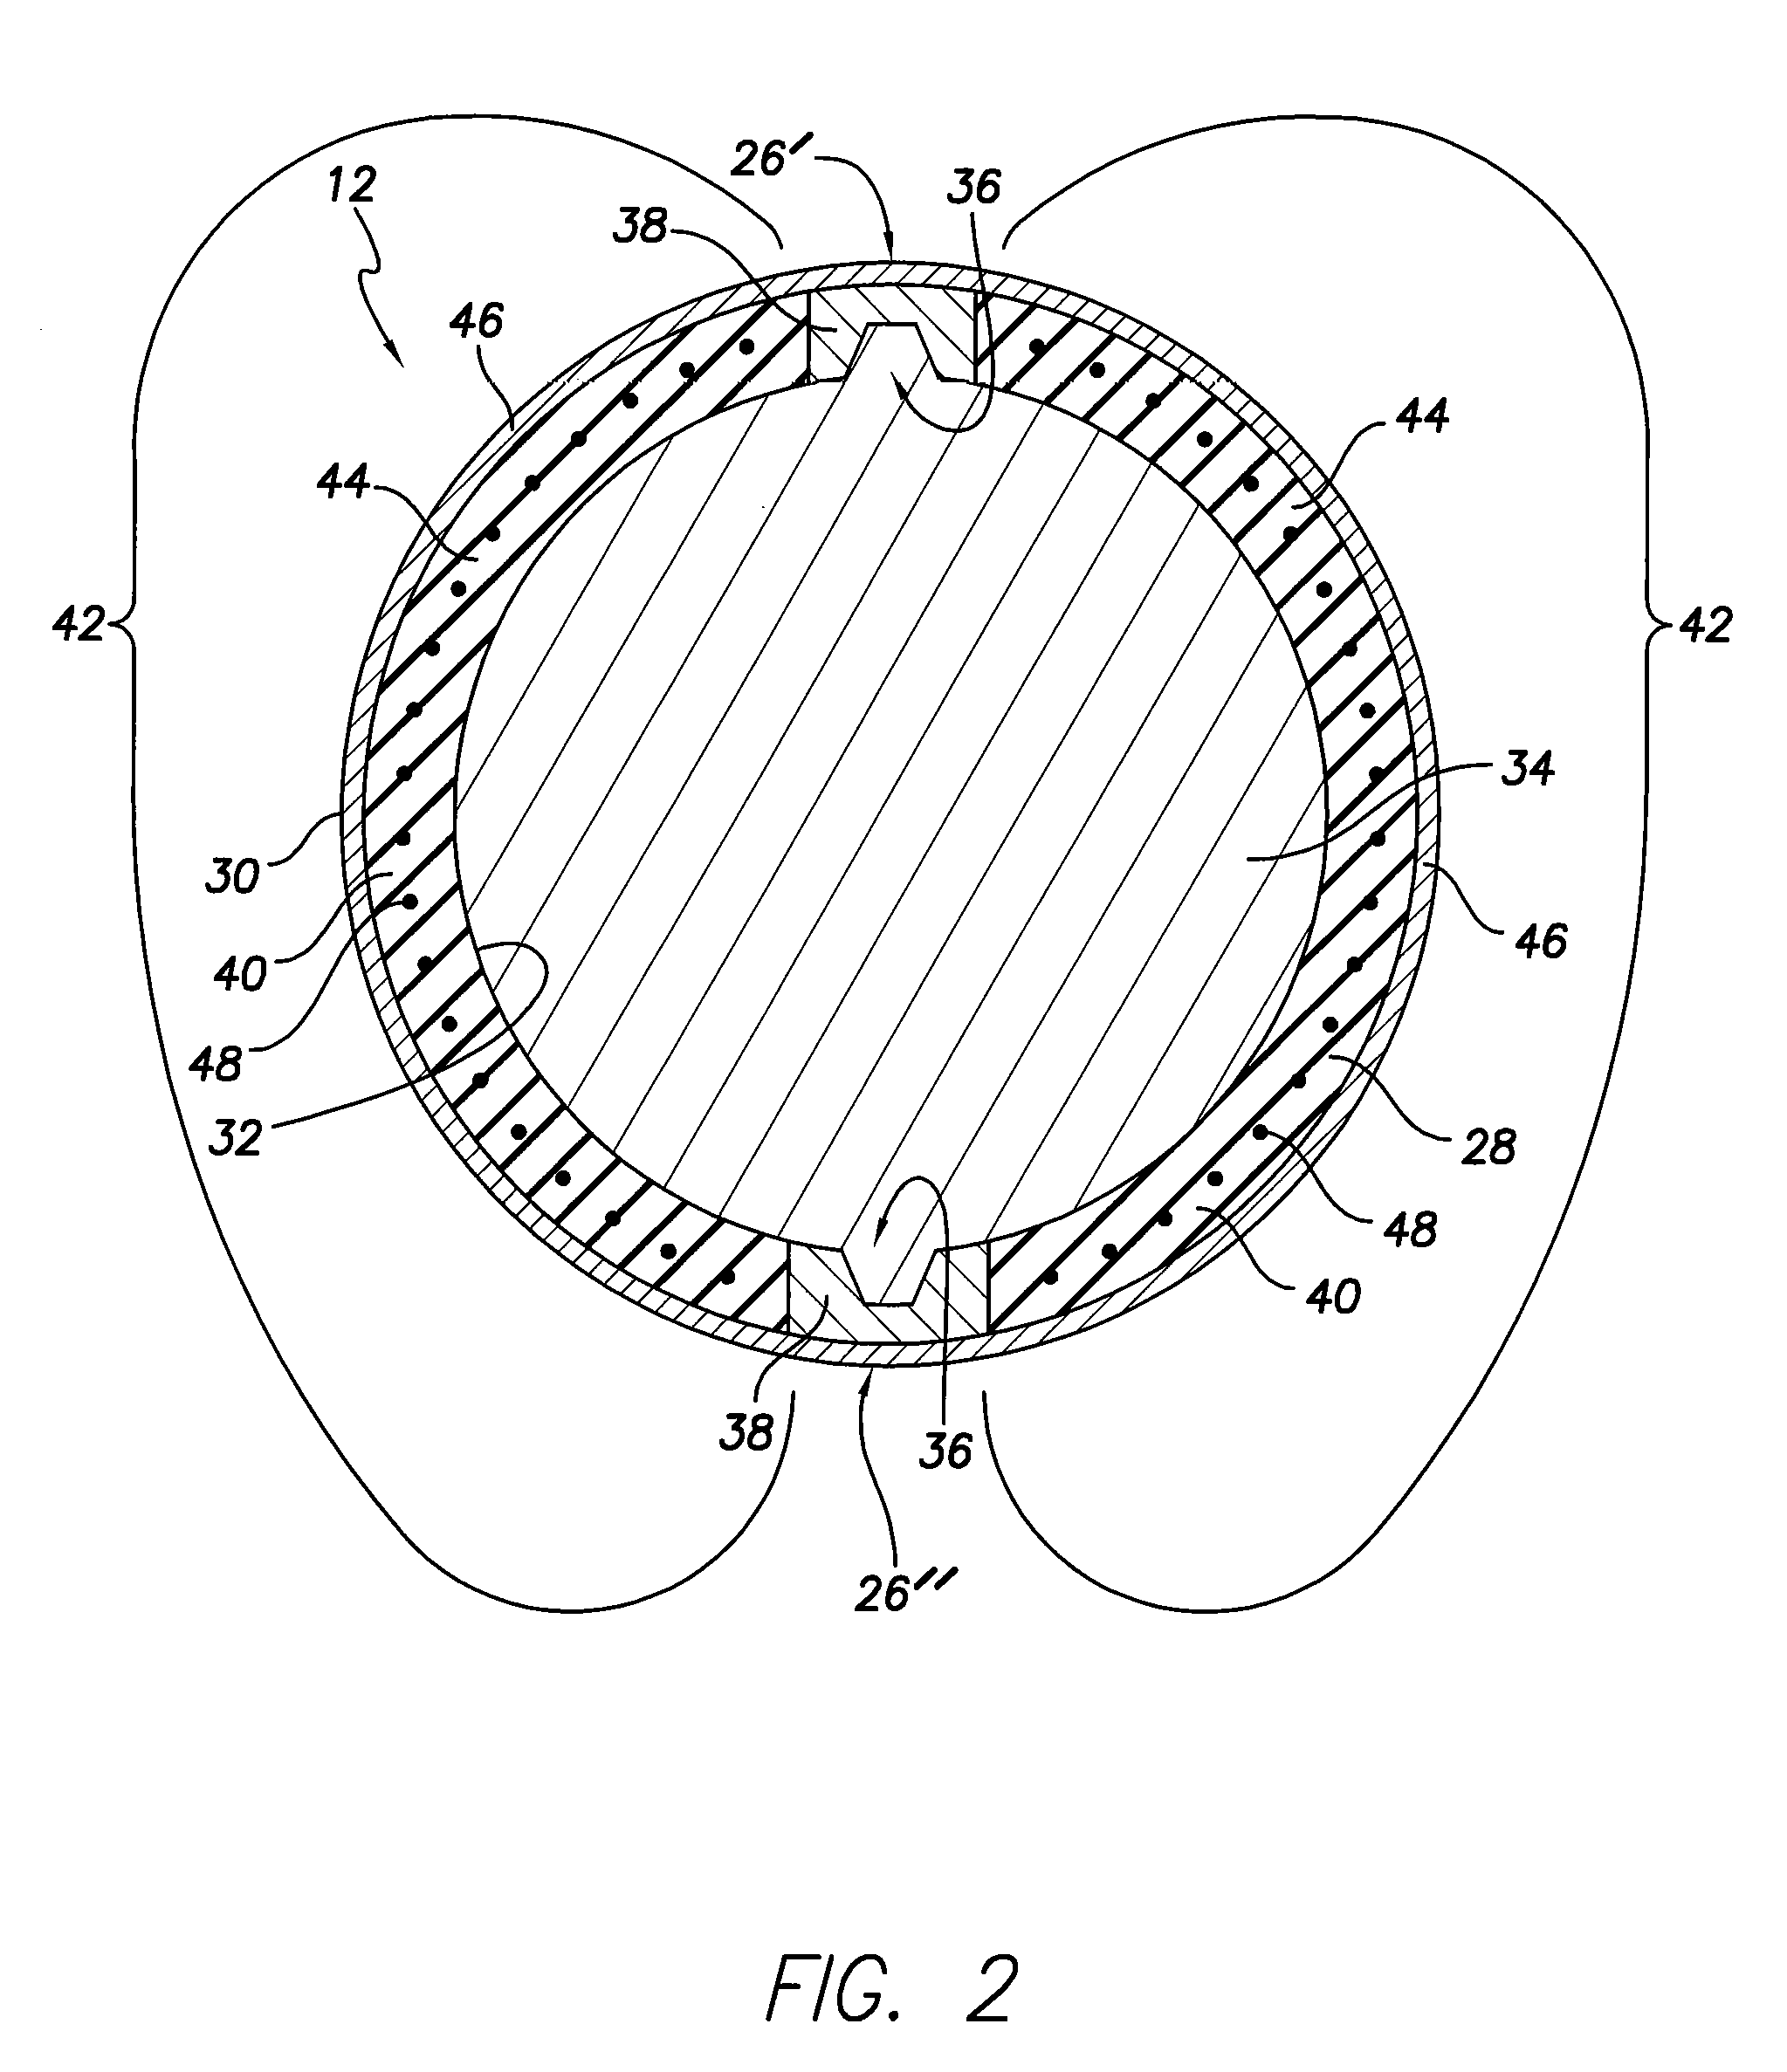 Braided peelable catheter and method of manufacture